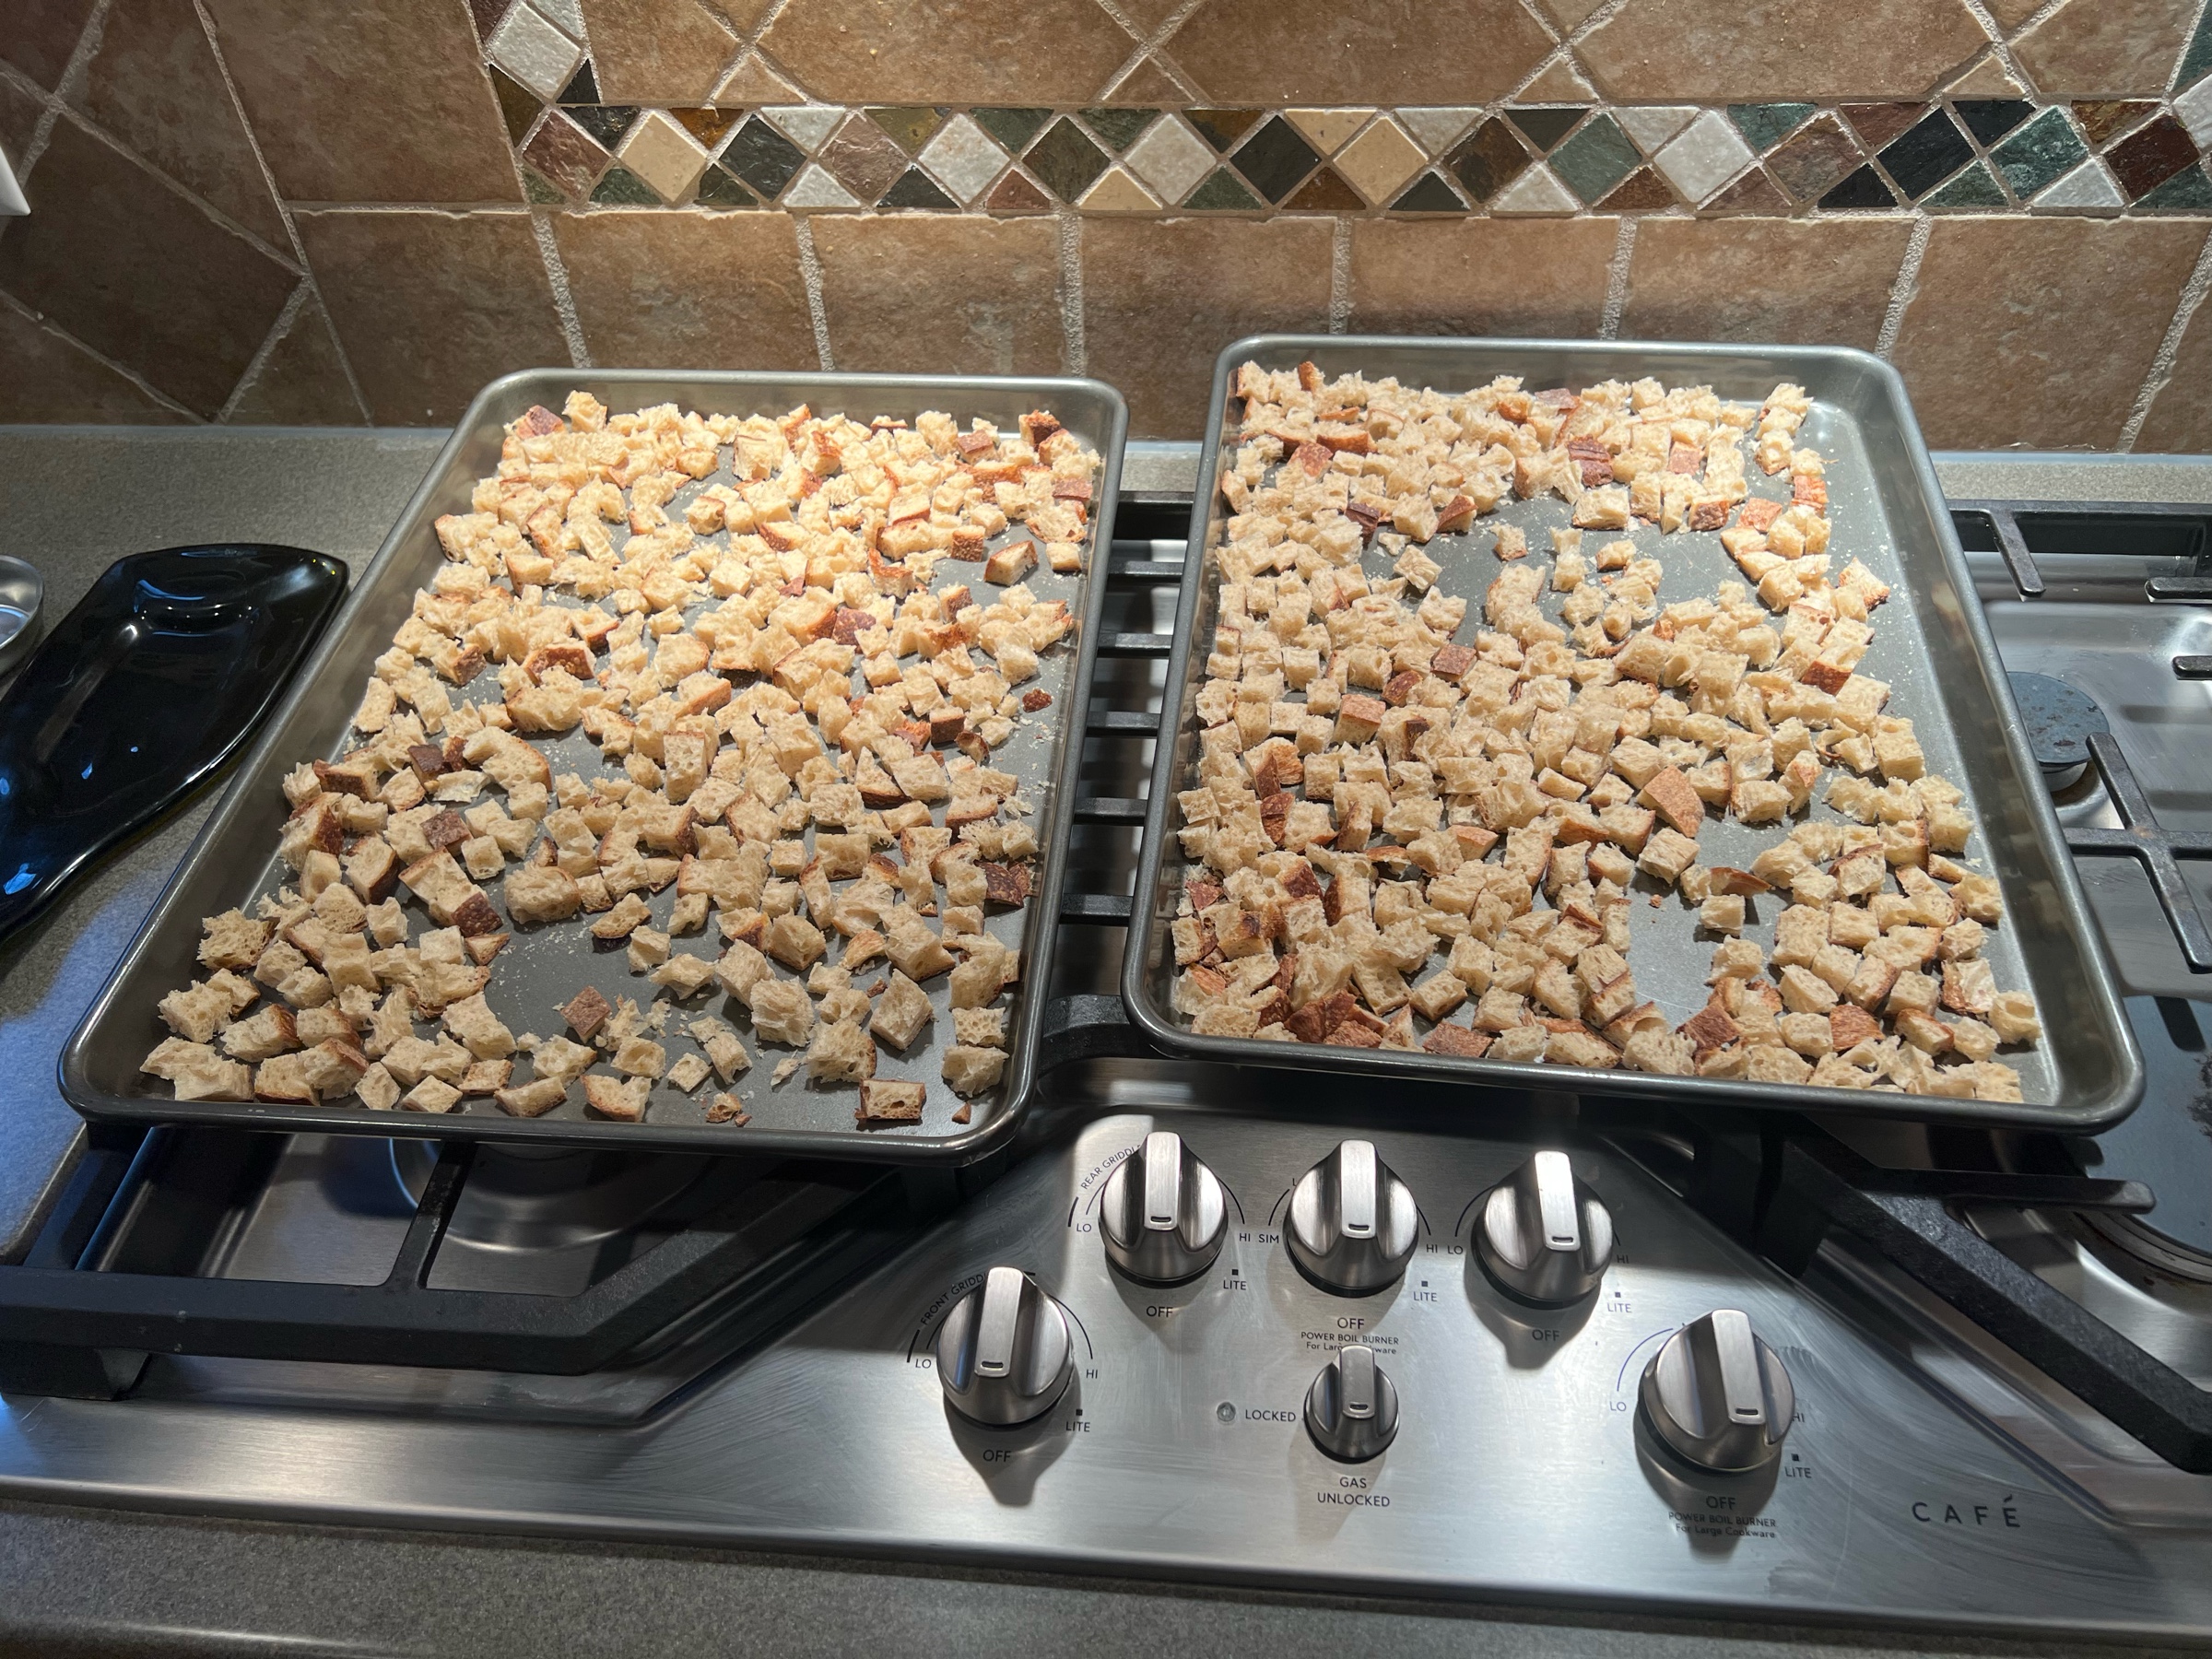 Two sheet pans of bread cubes, fresh out of the oven.